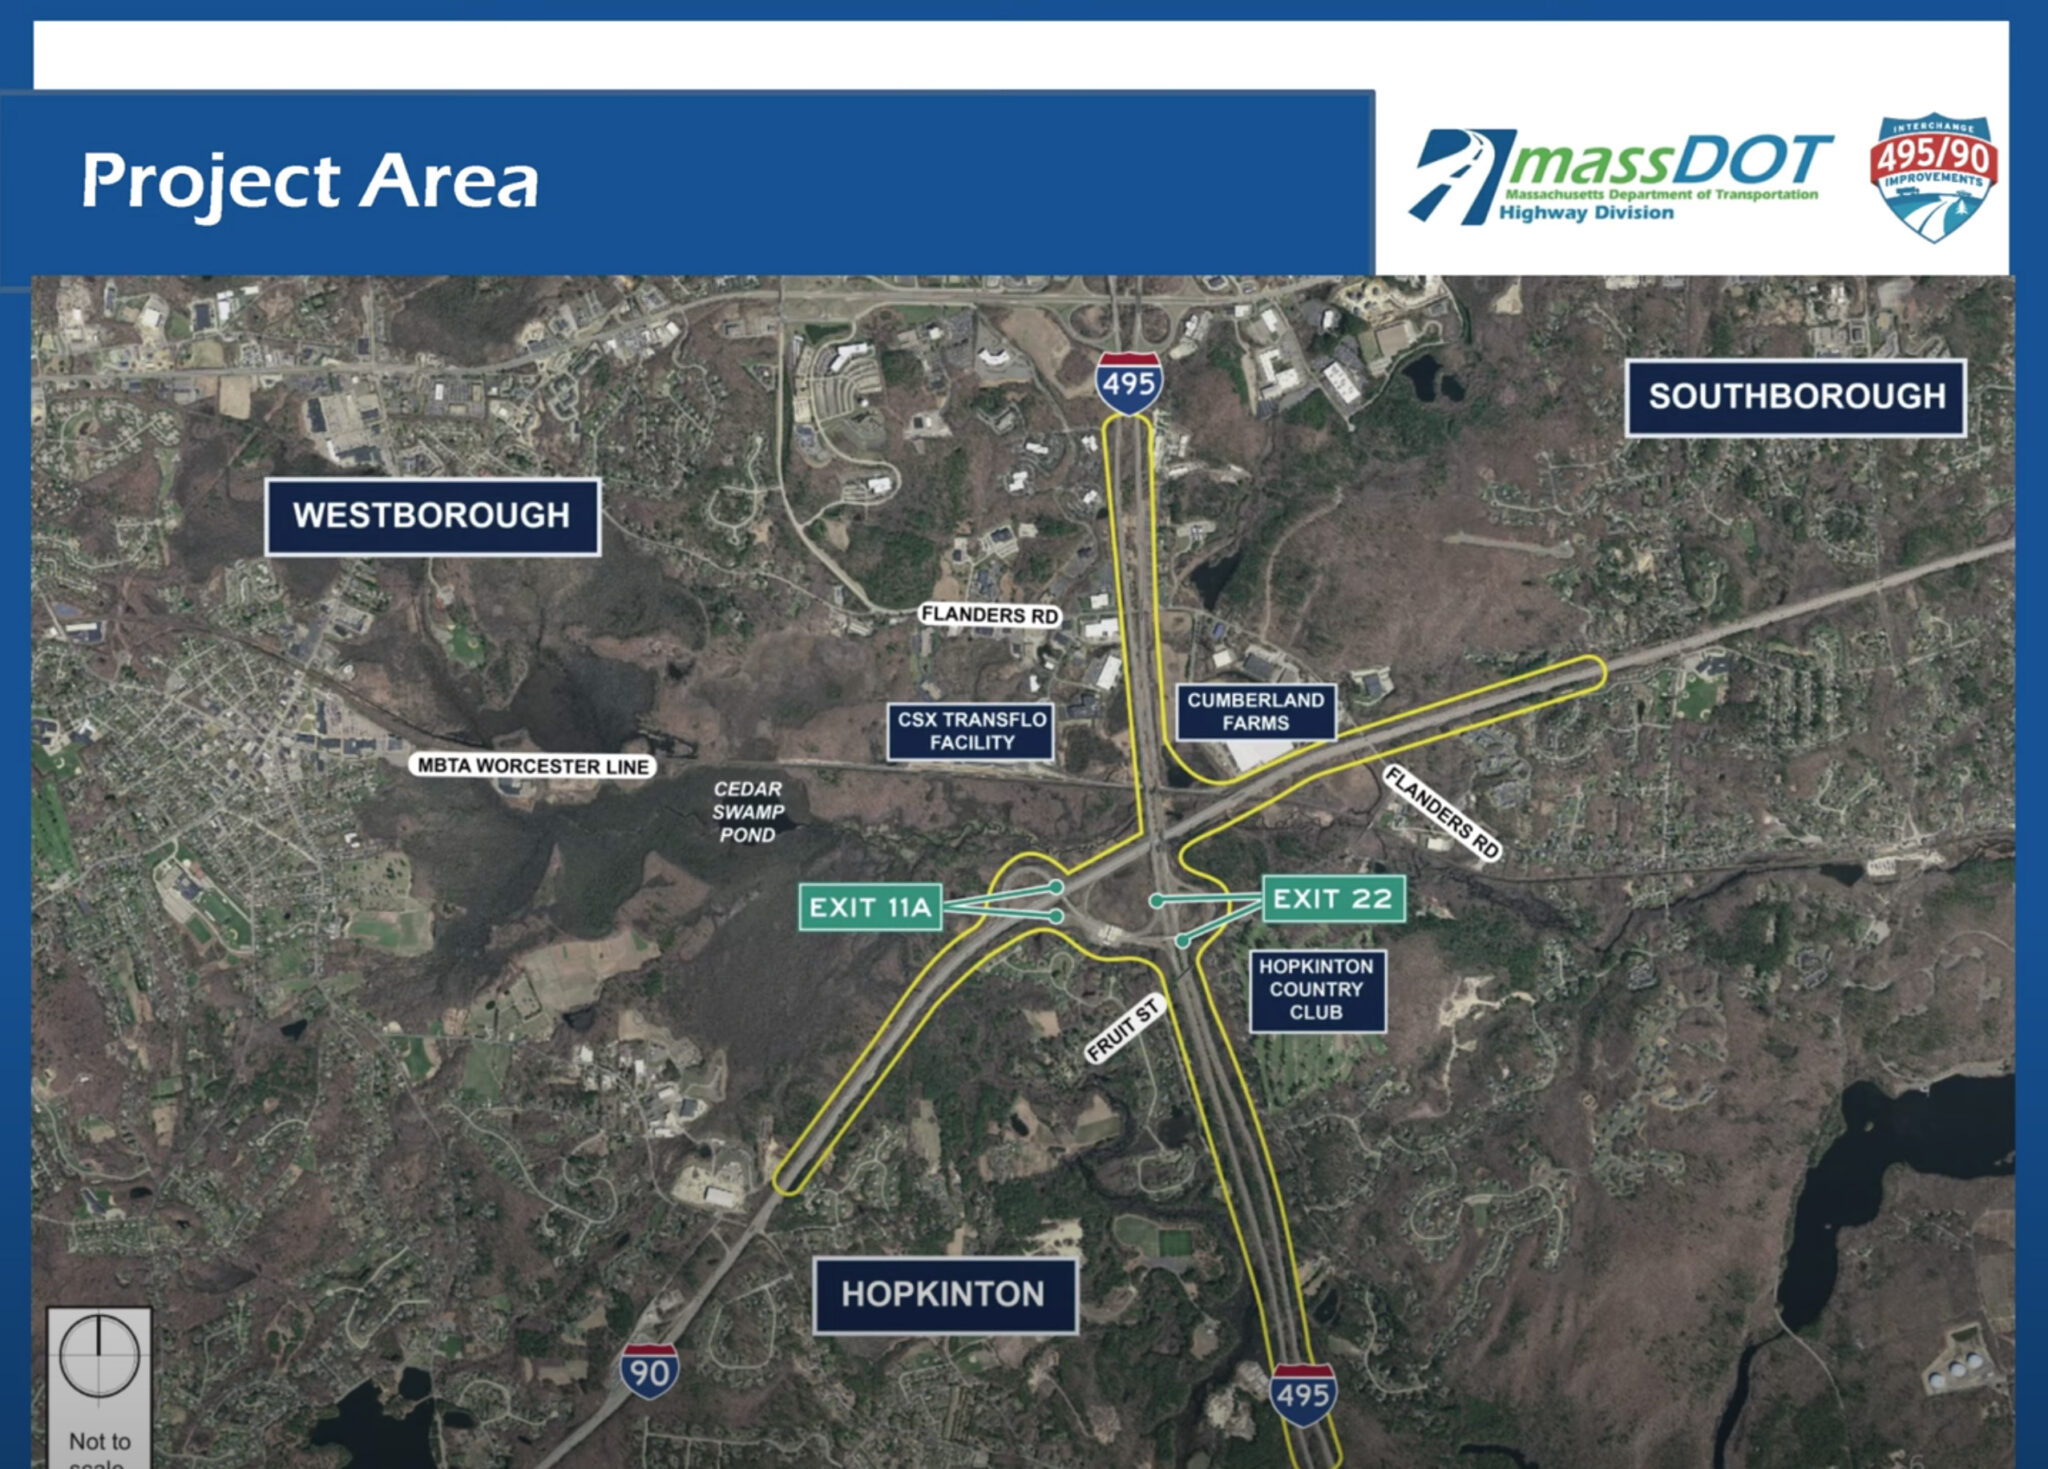 Ramp closures in place Wednesday night as part of I-495/I-90 Interchange Improvement Project